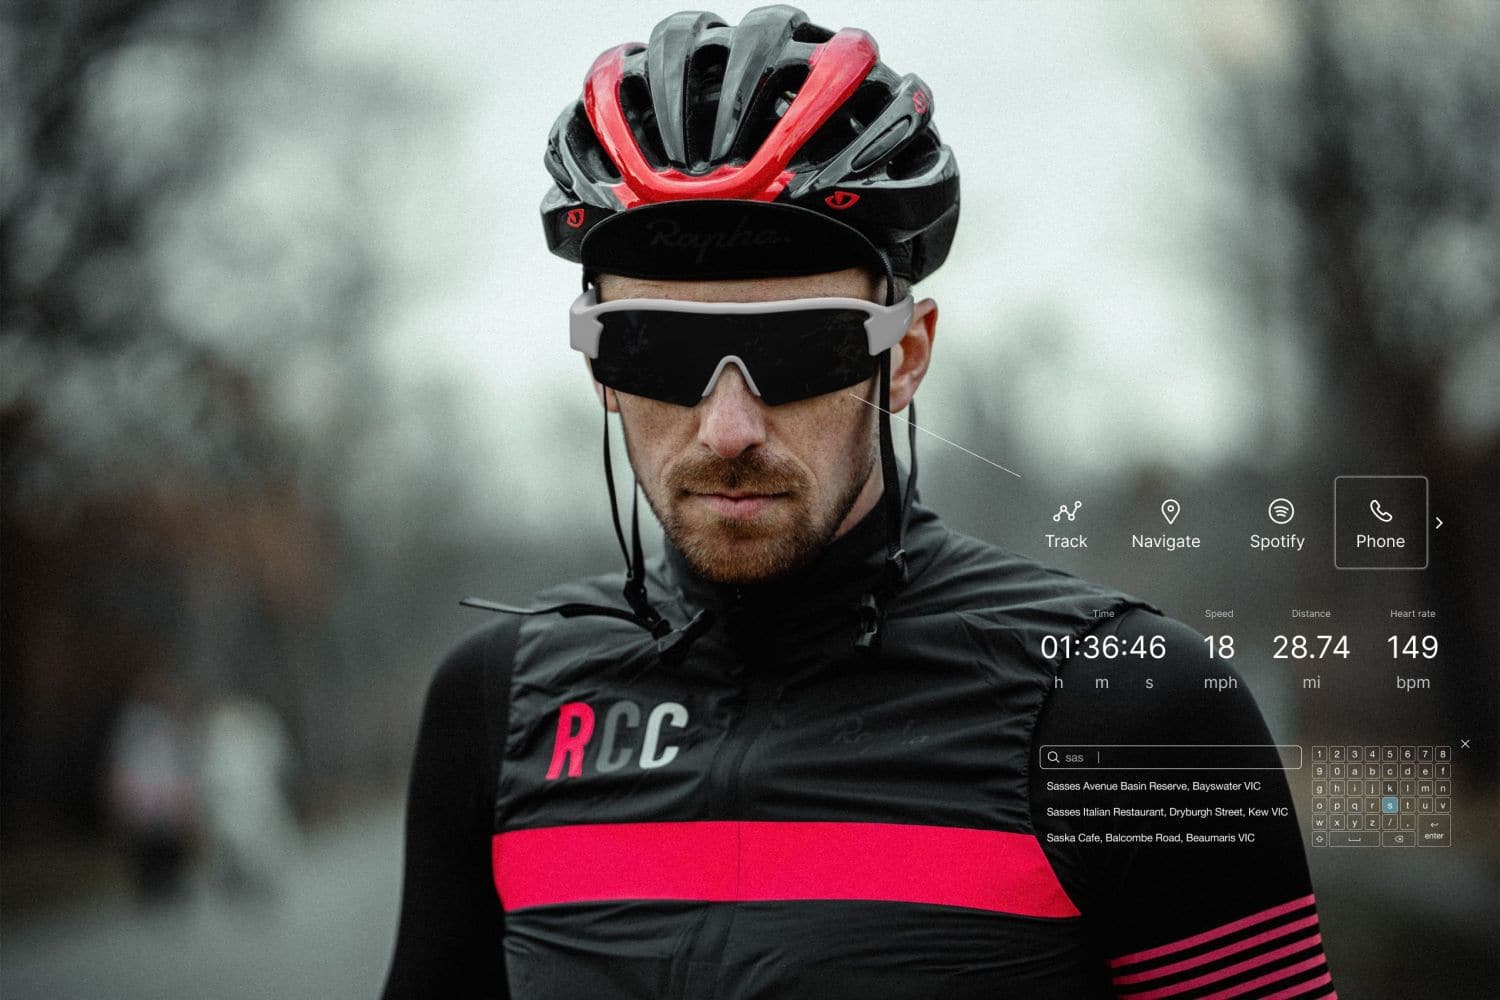 Minimis Glass are Smart HUD Sunglasses that display stats and maps